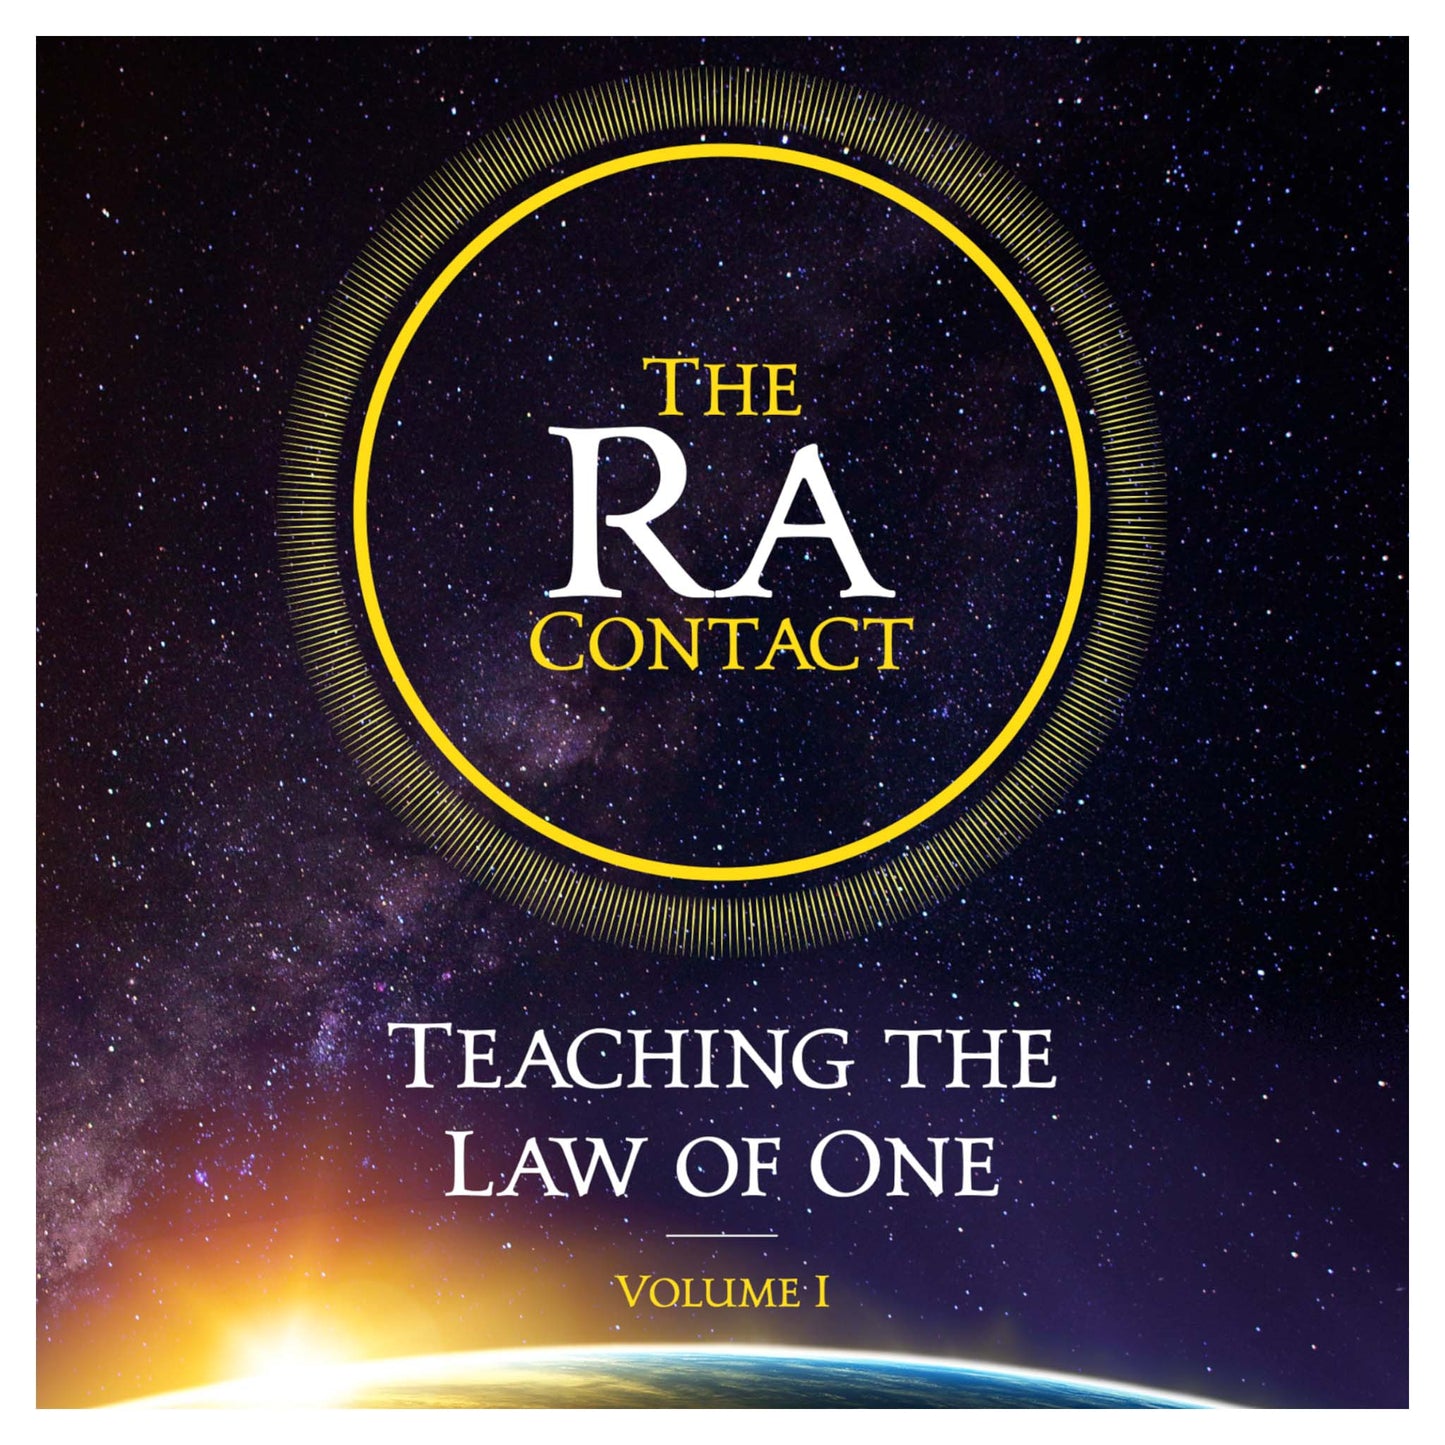 The Ra Contact: Teaching the Law of One - Volume 1 (Audiobook)